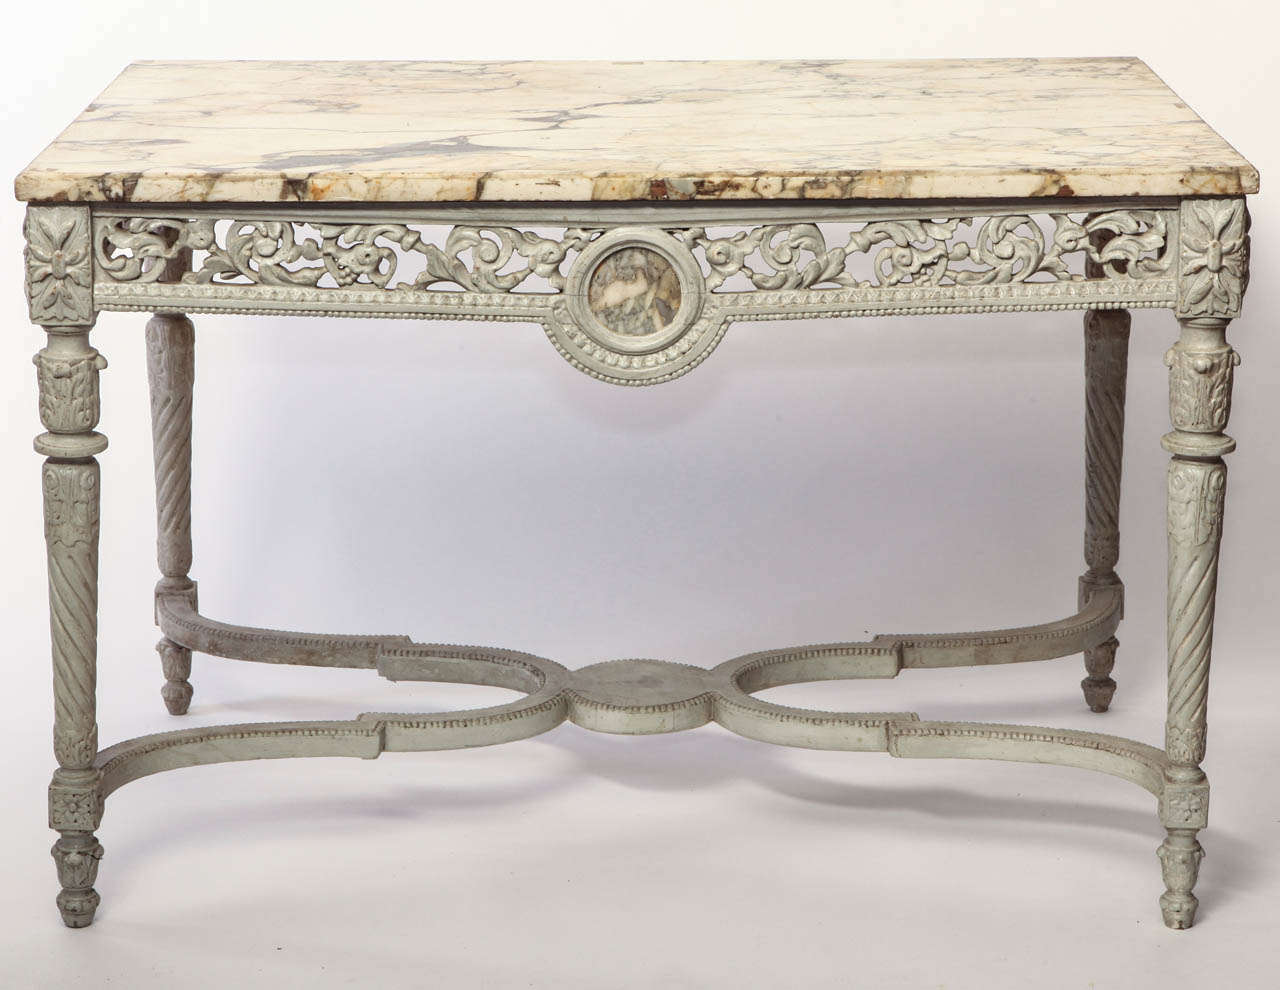 Elegant French 19th century finely carved and ivory painted center table with breche marble top.